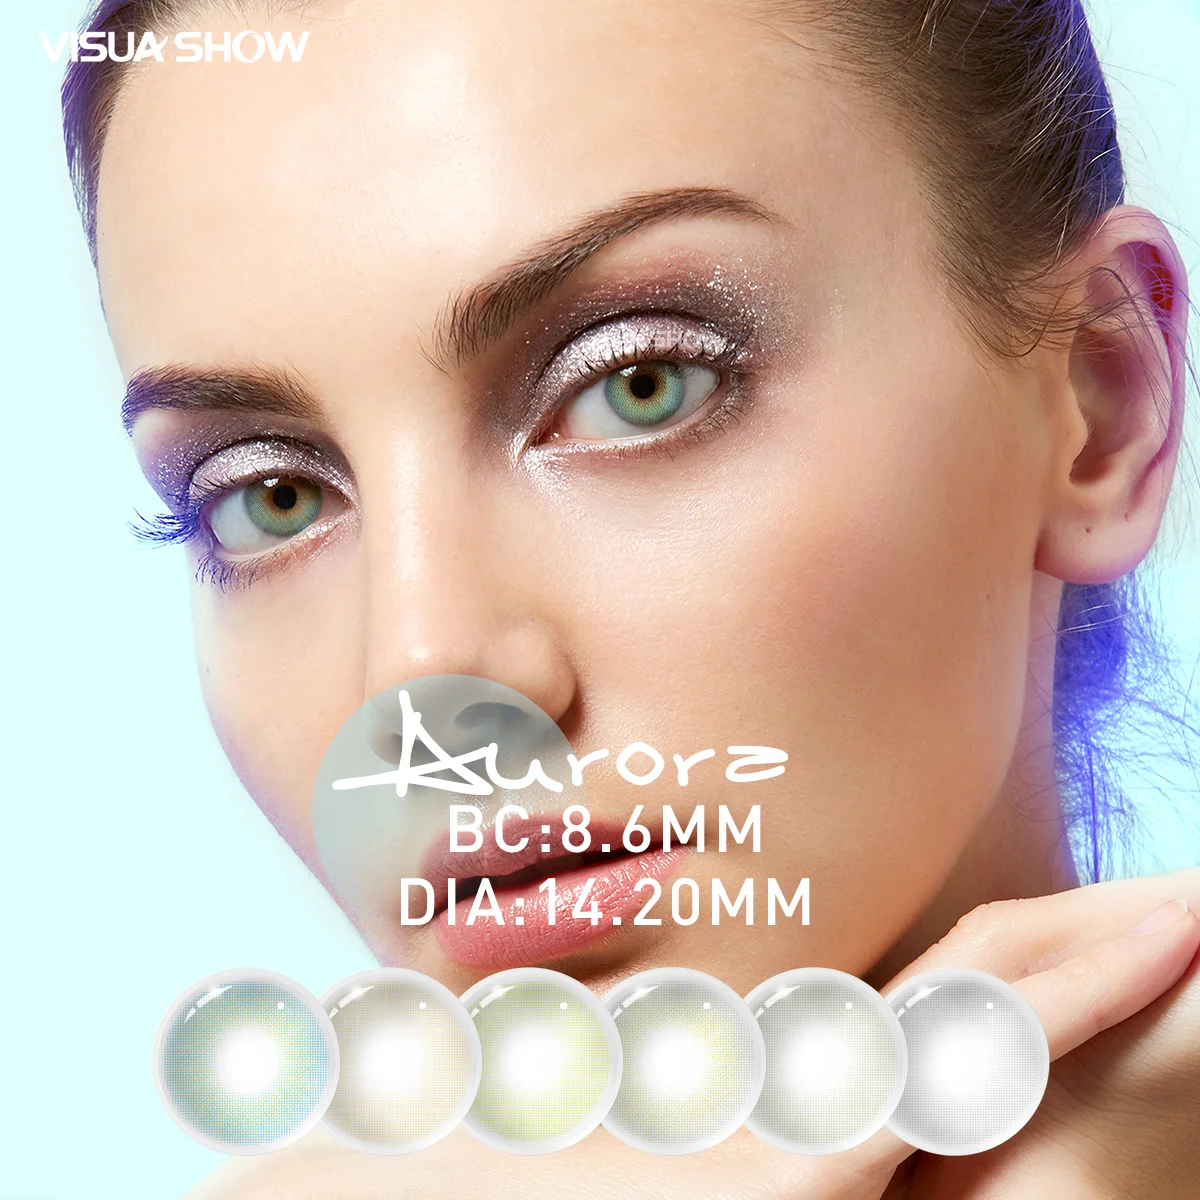 

VISUASHOW Polar Light 2 Pcs Yearly Use Colored Contact Lenses For Eye Beauty Myopia Contact Lens -1.00 to -8.00